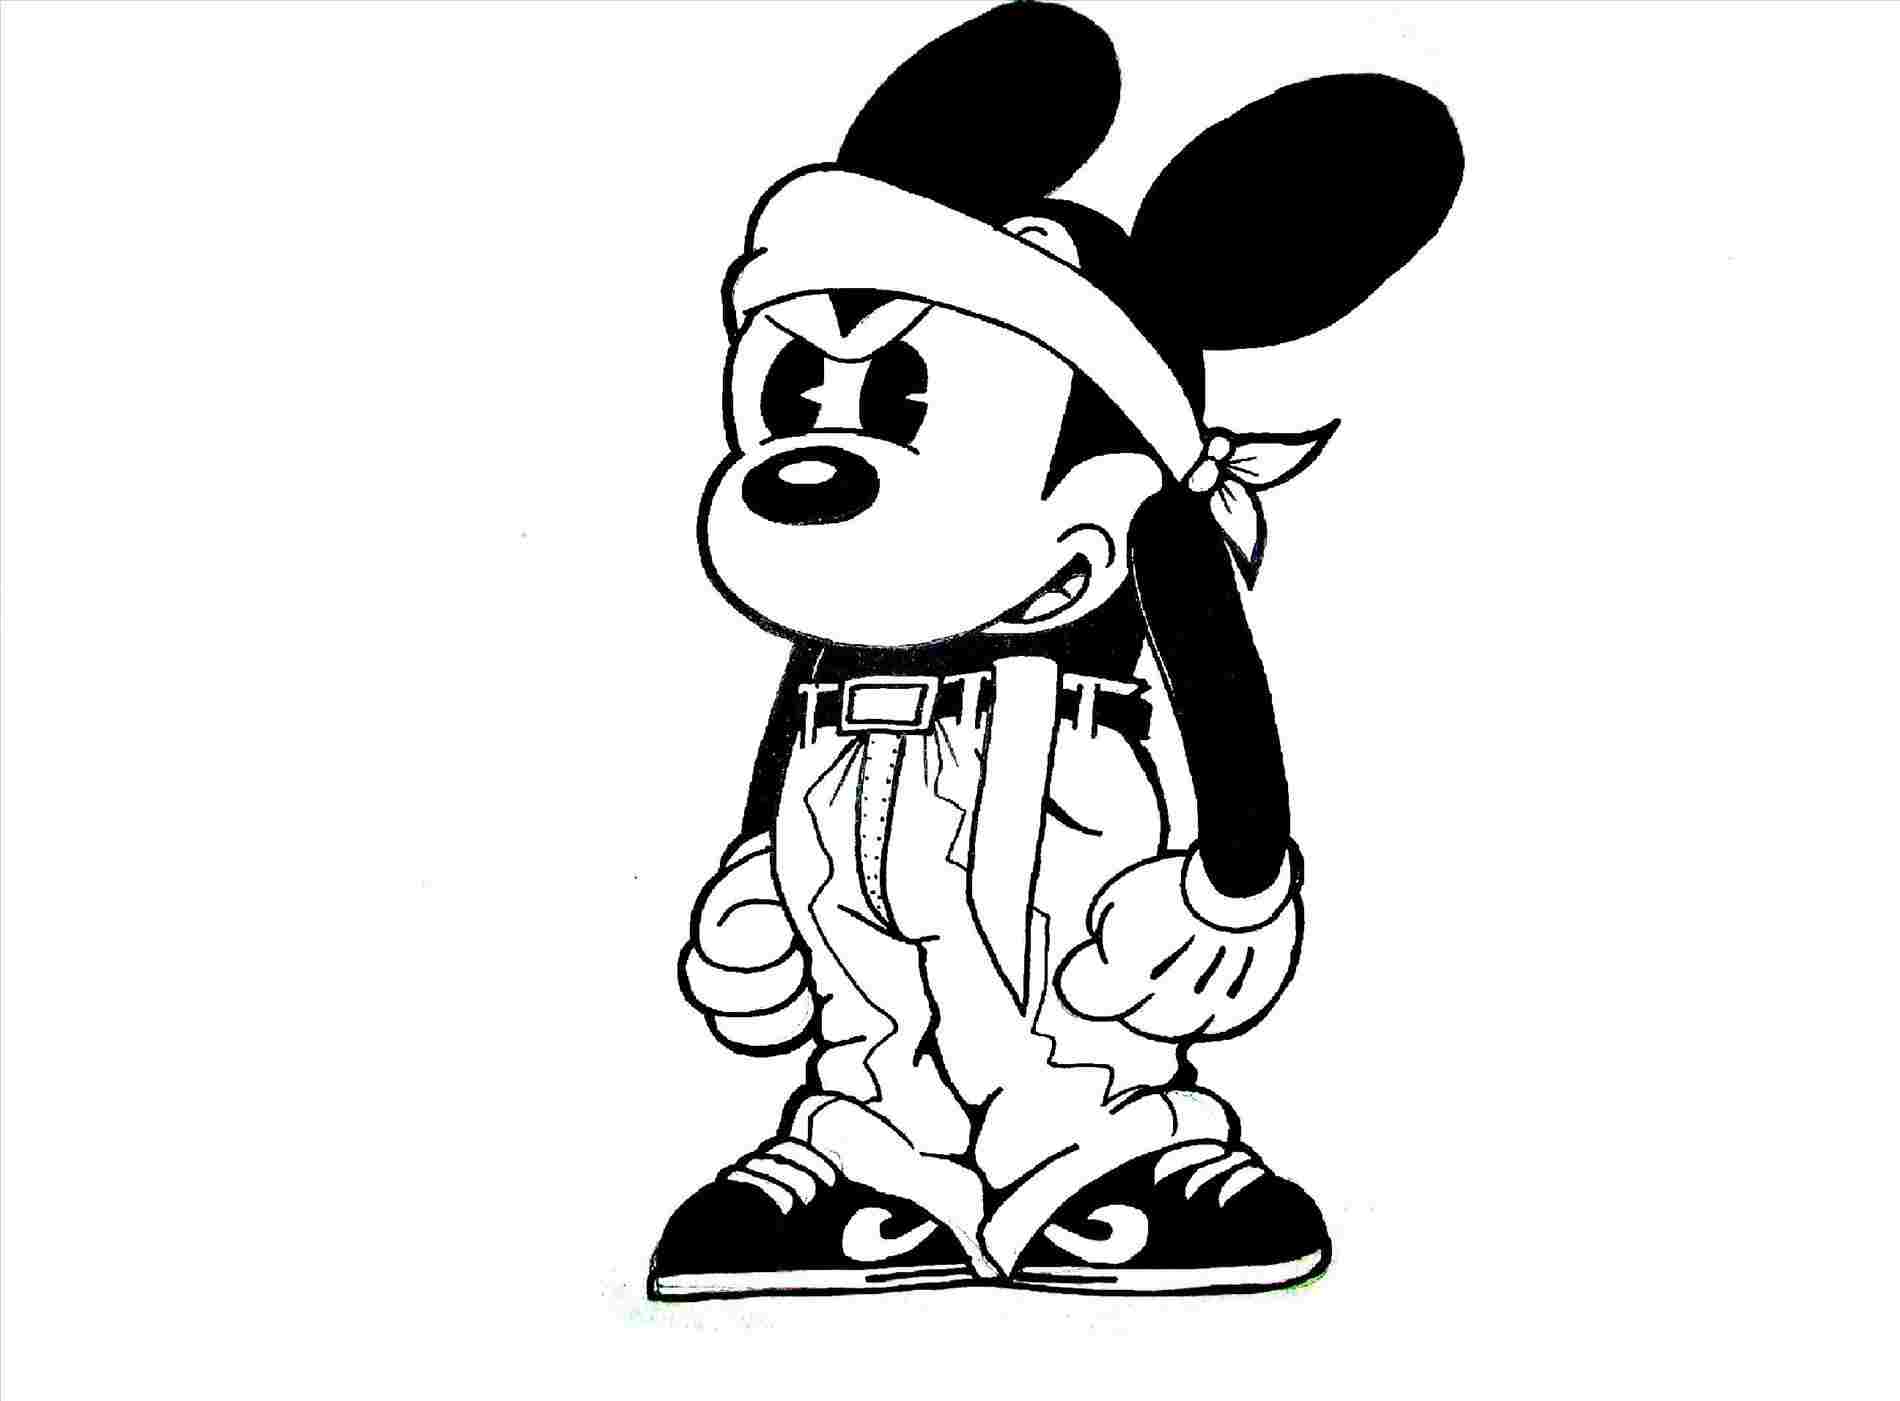 Gangster Cartoon Drawings | Free download on ClipArtMag